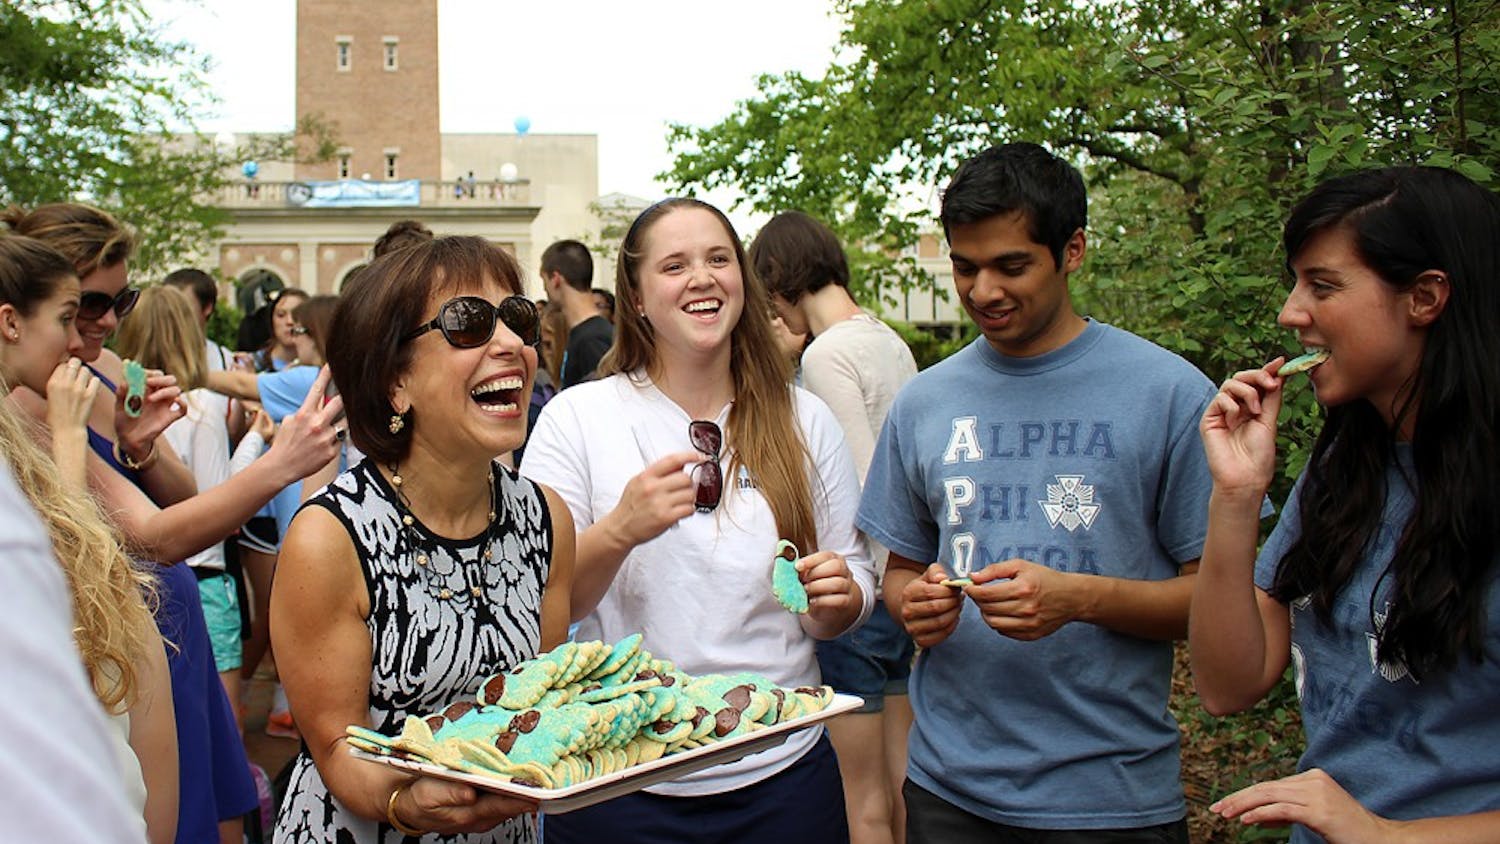 The General Alumni Association hosted the annual Senior Belltower Climb on Tuesday. Chancellor Folt stopped by to hand out cookies to those waiting in line and do the climb as well.